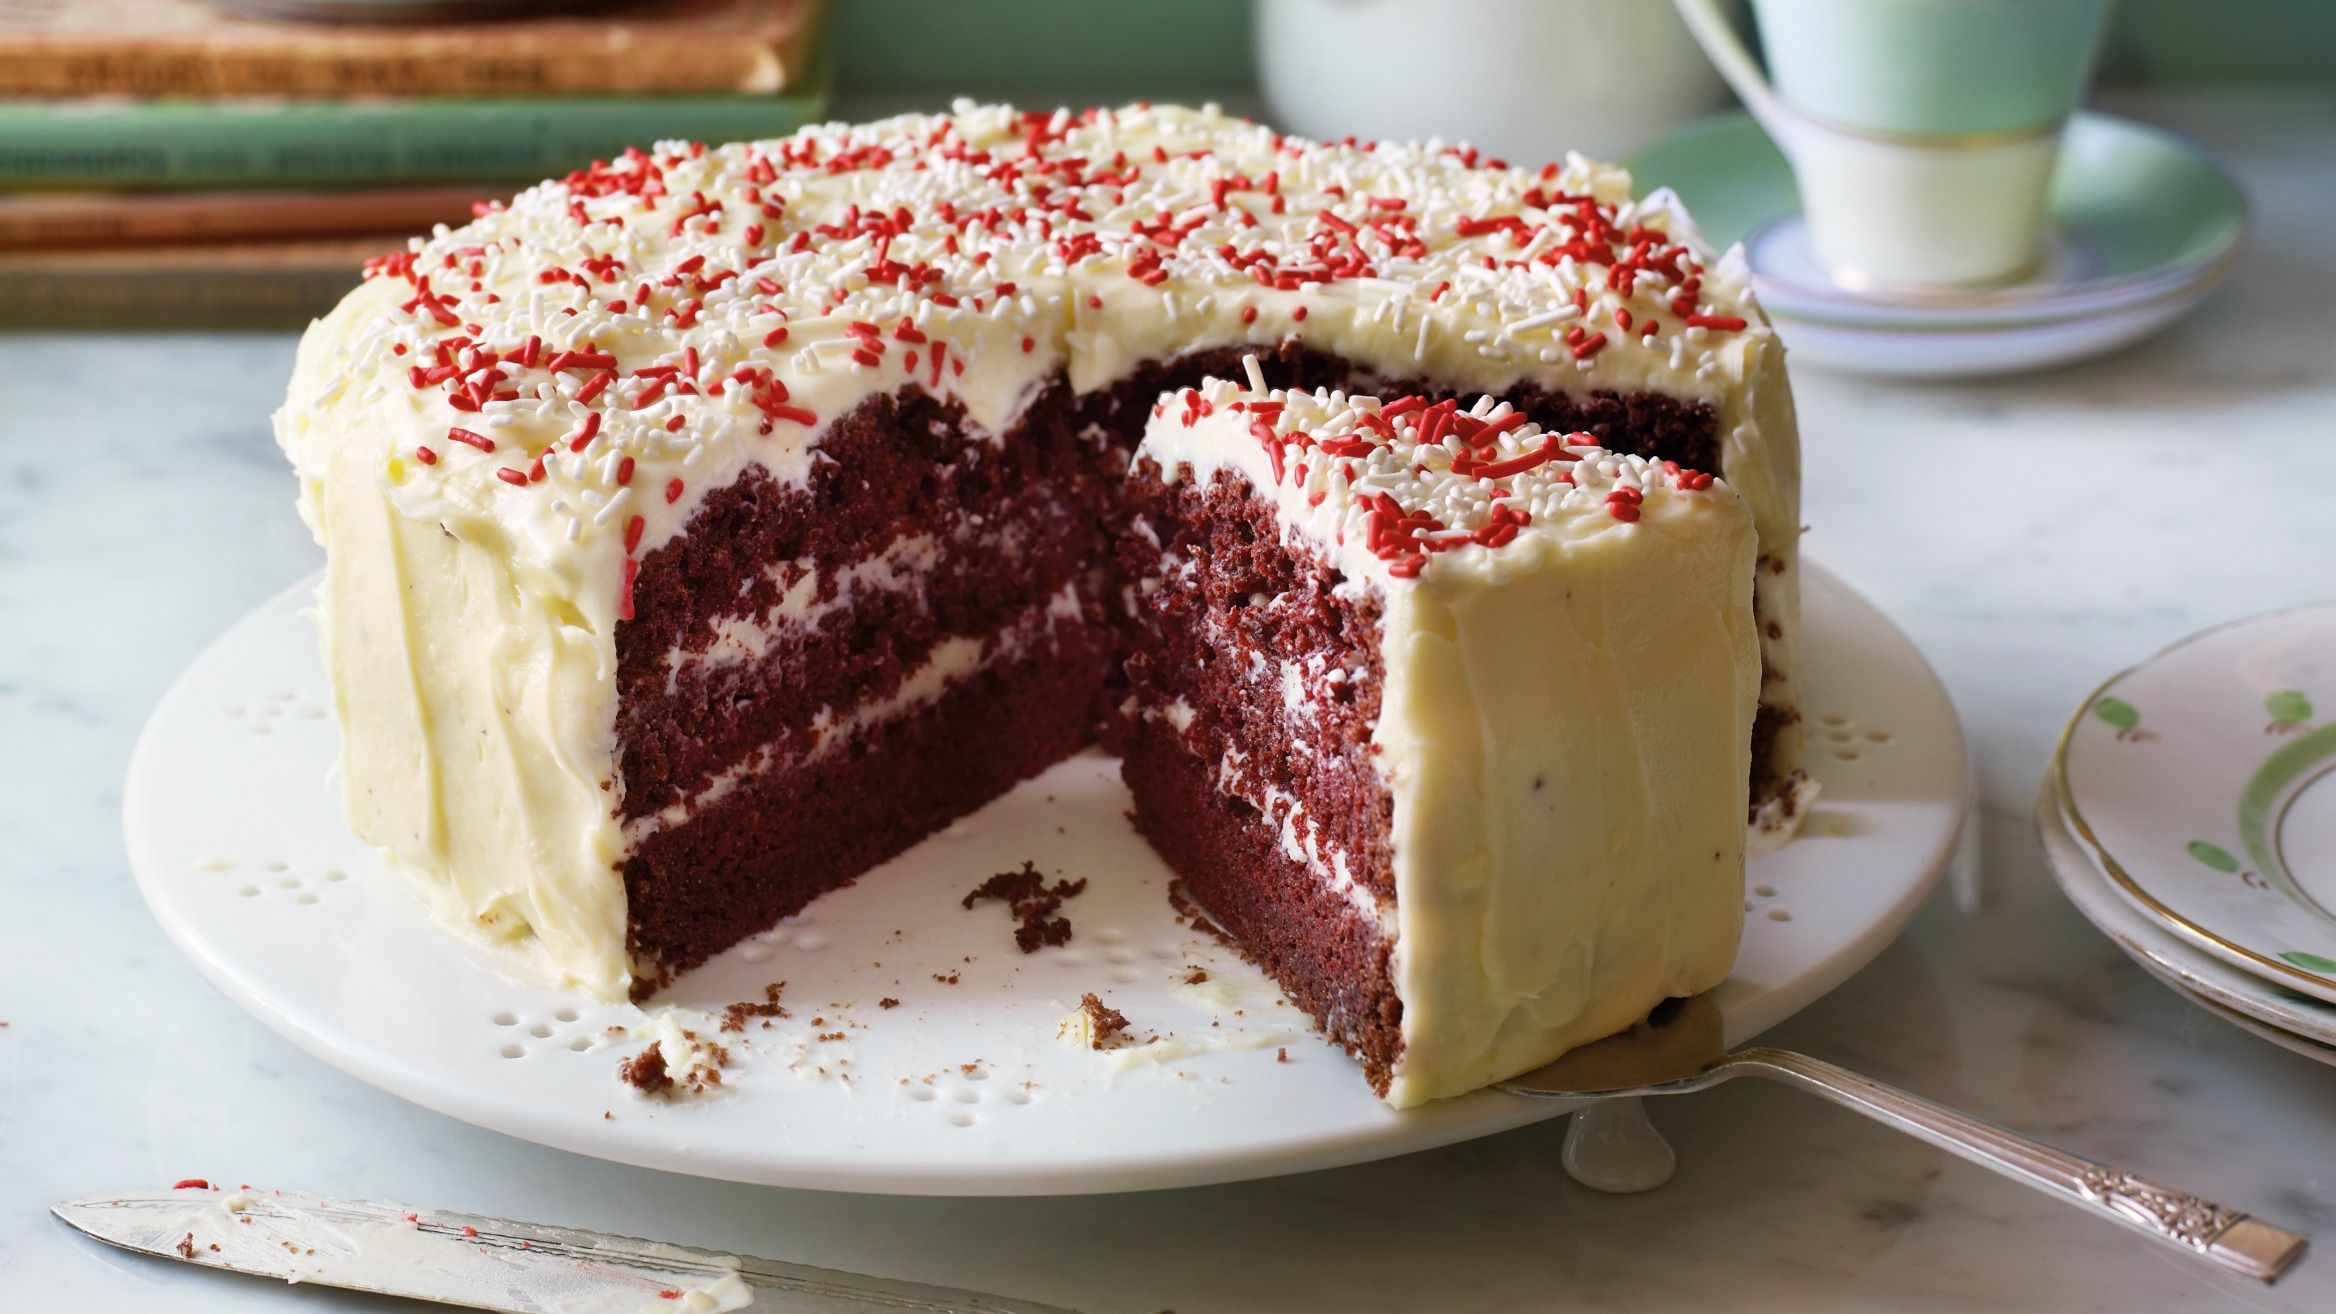 Red velvet cake  Fancy a weekend baking project Give this decadent  fourlayer red velvet cake a go with a chocolatey sponge and plenty of  smooth icing Find this  By BBC